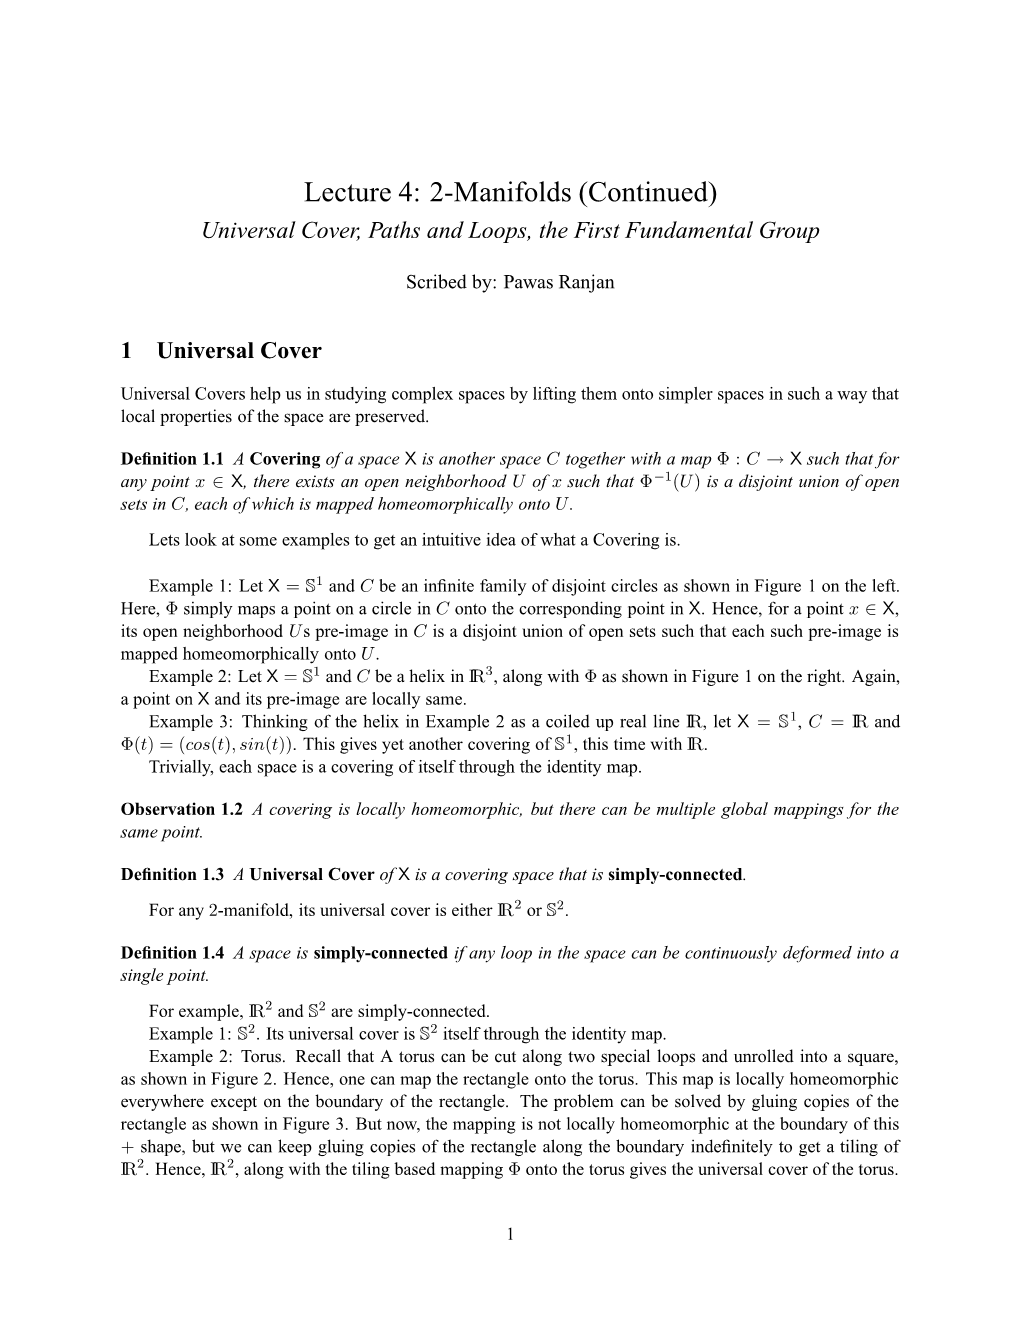 Lecture 4: 2-Manifolds (Continued) Universal Cover, Paths and Loops, the First Fundamental Group